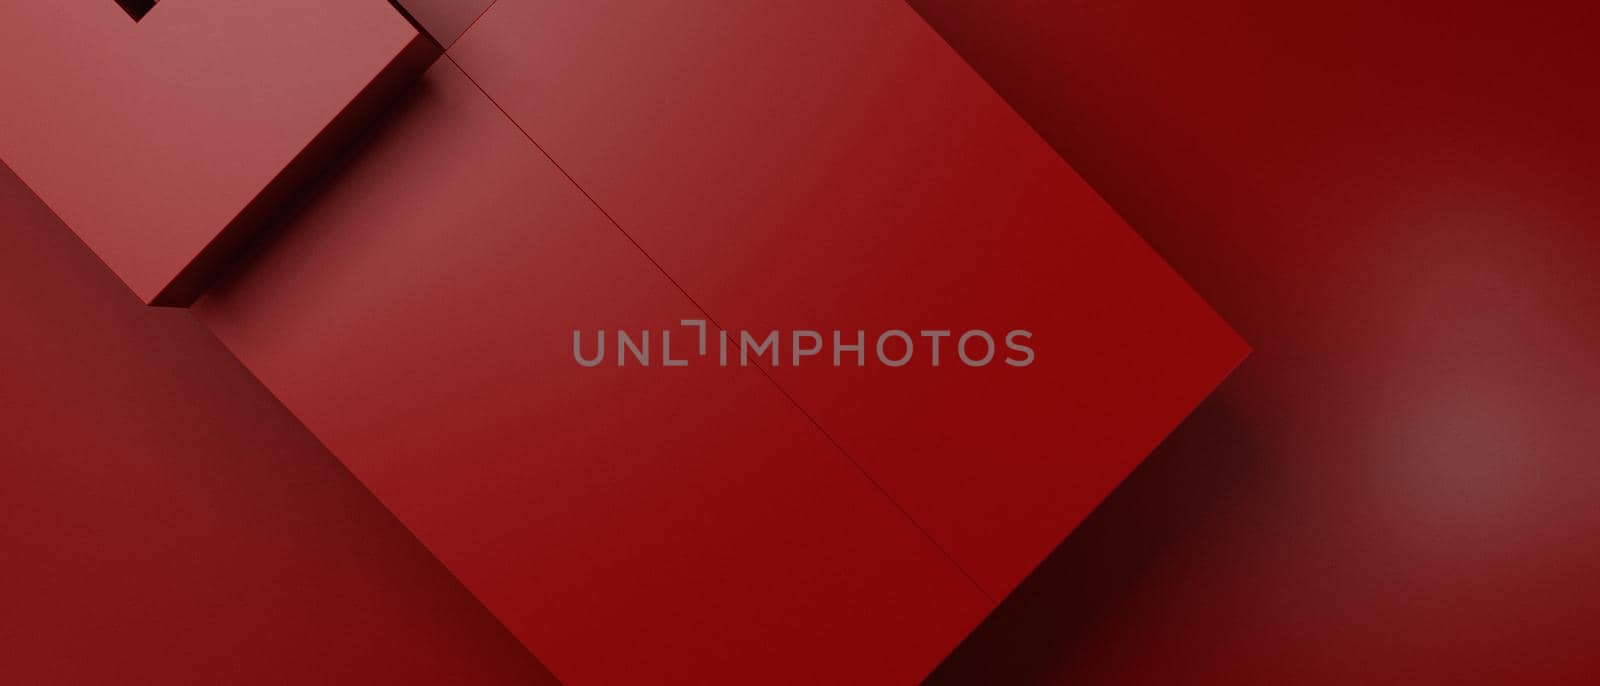 Abstract Shine Geometric Square Cubes Modern Dark Red Iillustration Background Wallpaper 3D